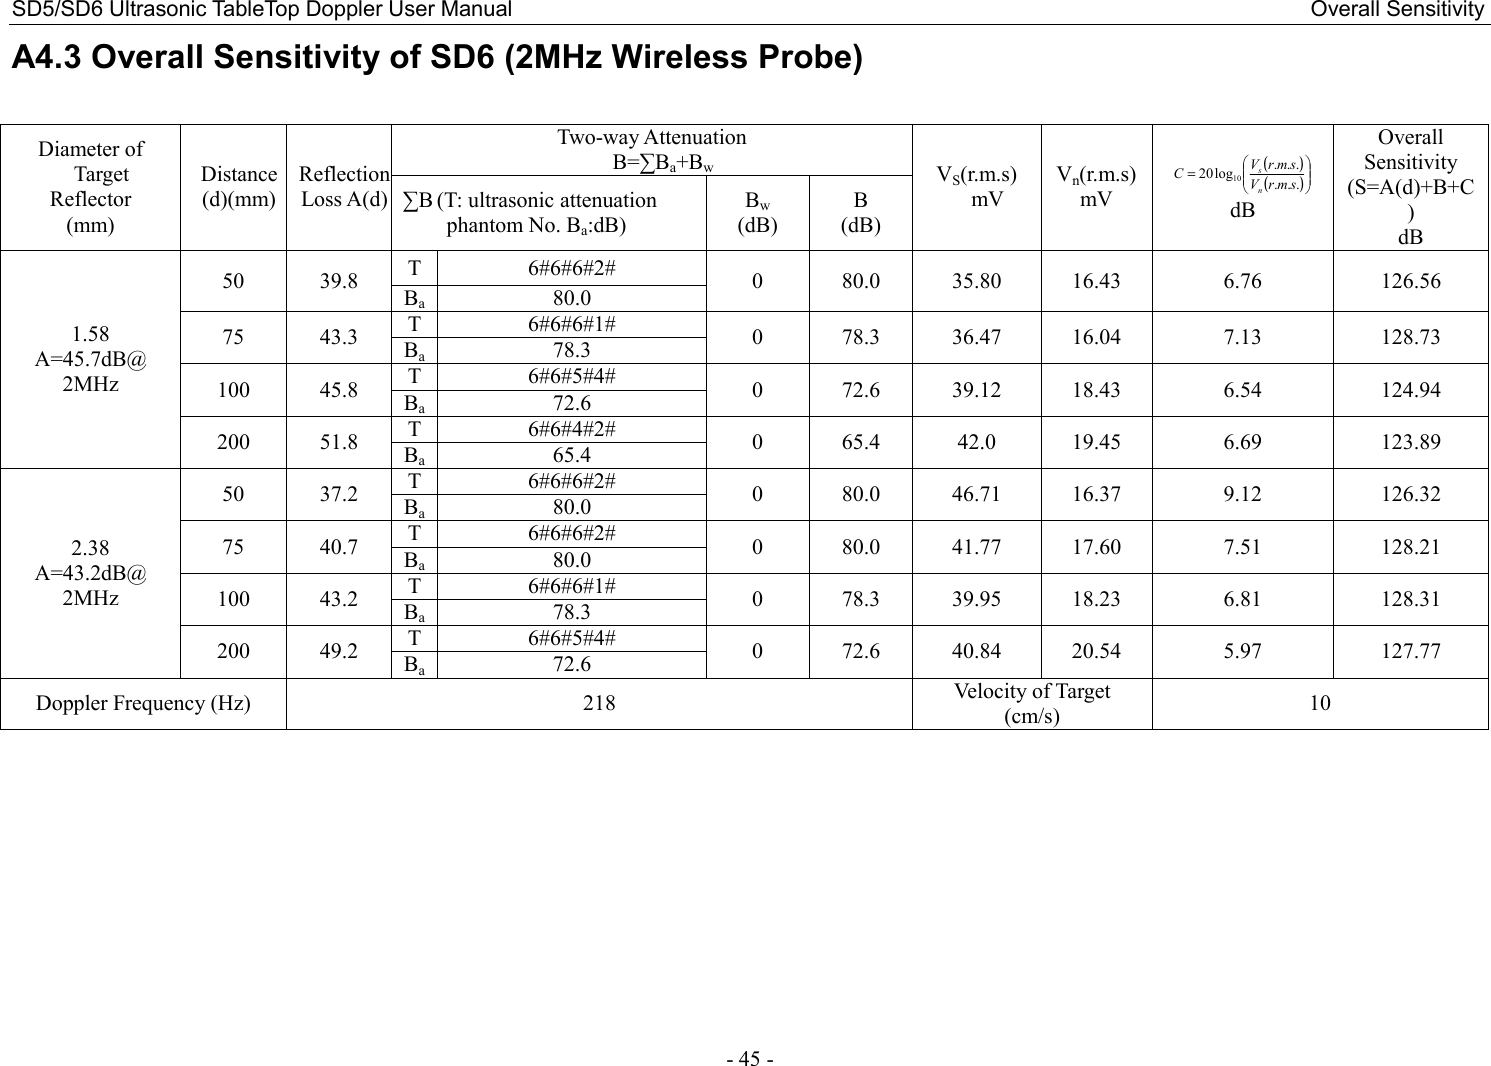 SD5/SD6 Ultrasonic TableTop Doppler User Manual                                                                                                                                                  Overall Sensitivity - 45 - A4.3 Overall Sensitivity of SD6 (2MHz Wireless Probe)  Diameter of Target Reflector (mm) Distance (d)(mm) Reflection Loss A(d) Two-way Attenuation B=∑Ba+Bw VS(r.m.s) mV Vn(r.m.s) mV ()( )=......log2010smrVsmrVCns dB Overall Sensitivity (S=A(d)+B+C) dB ∑B (T: ultrasonic attenuation   phantom No. Ba:dB) Bw (dB) B (dB) 1.58 A=45.7dB@ 2MHz 50  39.8  T 6#6#6#2#  0  80.0  35.80  16.43  6.76  126.56 Ba 80.0 75  43.3  T 6#6#6#1#  0  78.3  36.47  16.04  7.13  128.73 Ba 78.3 100  45.8  T 6#6#5#4#  0  72.6  39.12  18.43  6.54  124.94 Ba 72.6 200  51.8  T 6#6#4#2#  0  65.4  42.0  19.45  6.69  123.89 Ba 65.4 2.38 A=43.2dB@ 2MHz 50  37.2  T 6#6#6#2#  0  80.0  46.71  16.37  9.12  126.32 Ba 80.0 75  40.7  T 6#6#6#2#  0  80.0  41.77  17.60  7.51  128.21 Ba 80.0 100  43.2  T 6#6#6#1#  0  78.3  39.95  18.23  6.81  128.31 Ba 78.3 200  49.2  T 6#6#5#4#  0  72.6  40.84  20.54  5.97  127.77 Ba 72.6 Doppler Frequency (Hz)  218  Velocity of Target (cm/s)  10  